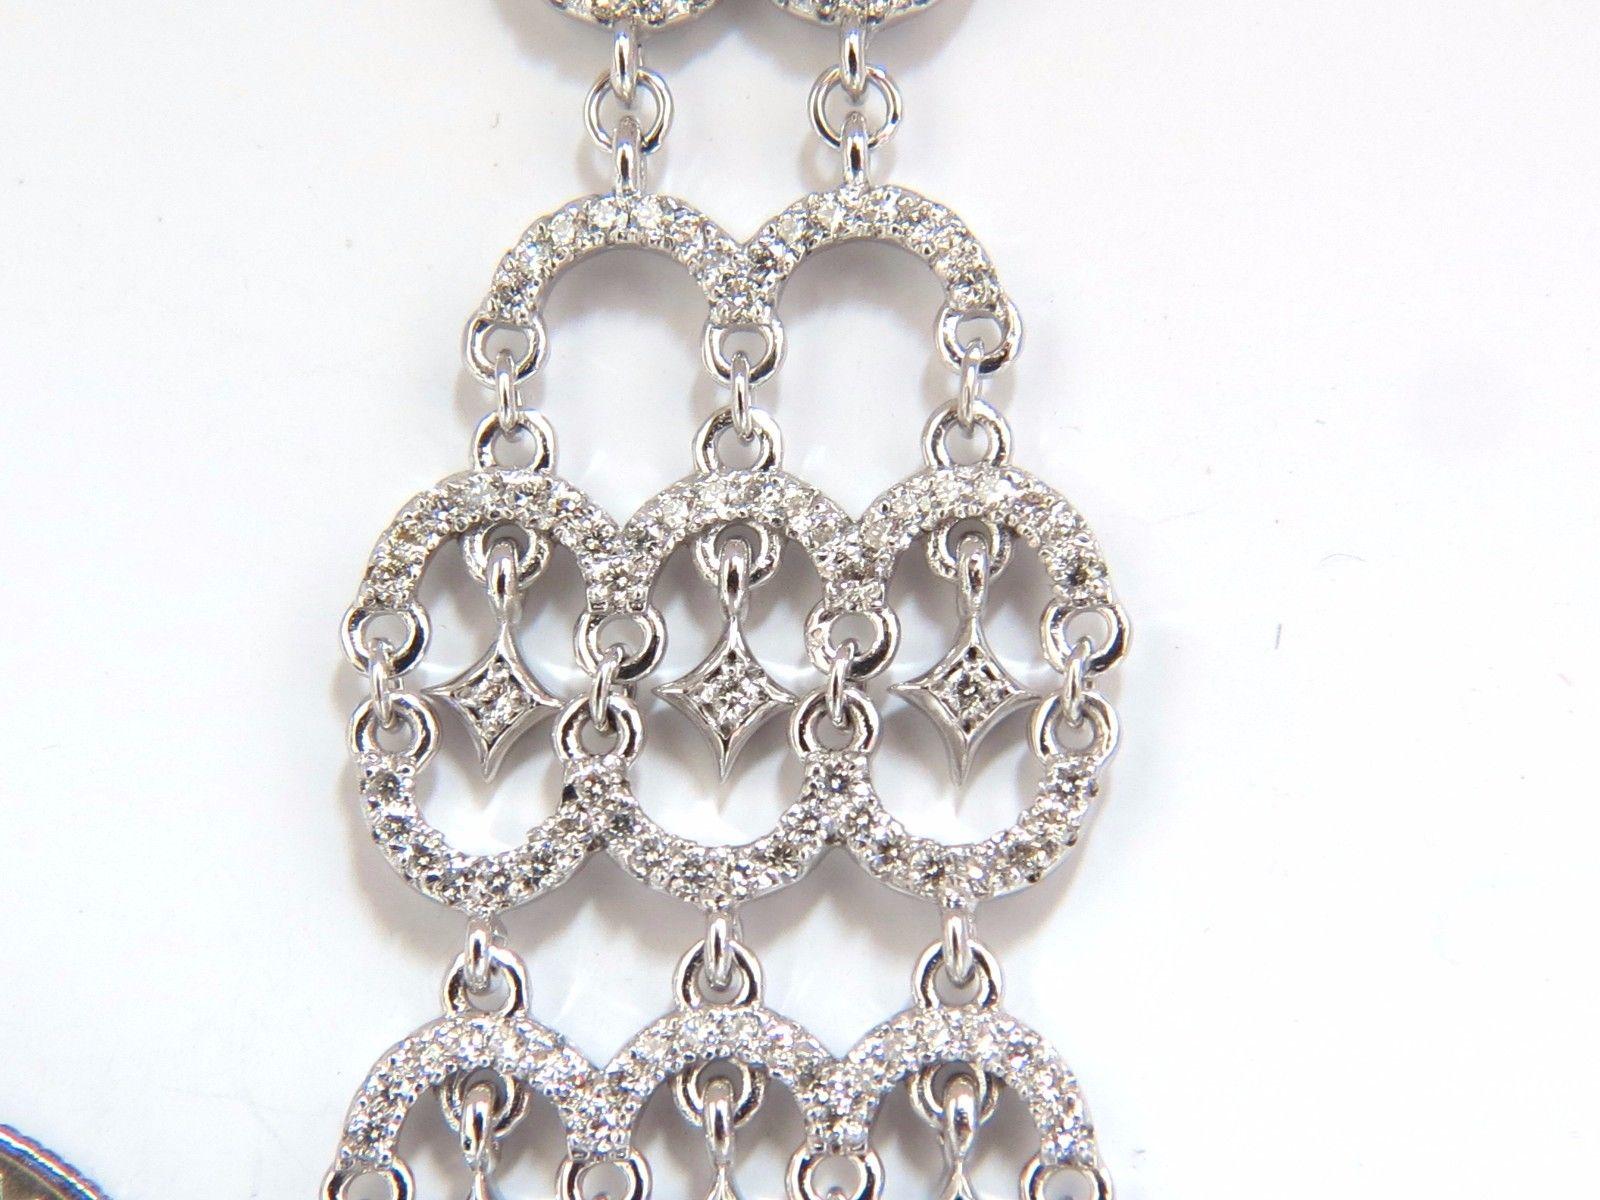 Long hinged loop diamond dangle earrings.

2.30cts of natural round diamonds: 

G-color, Vs-2  clarity.

14kt. white gold

18.5 grams.

Earrings measure: 4.25 Inch Length

.81 inch diameter

Comfortable Omega closure

$8,000 Appraisal Certificate to